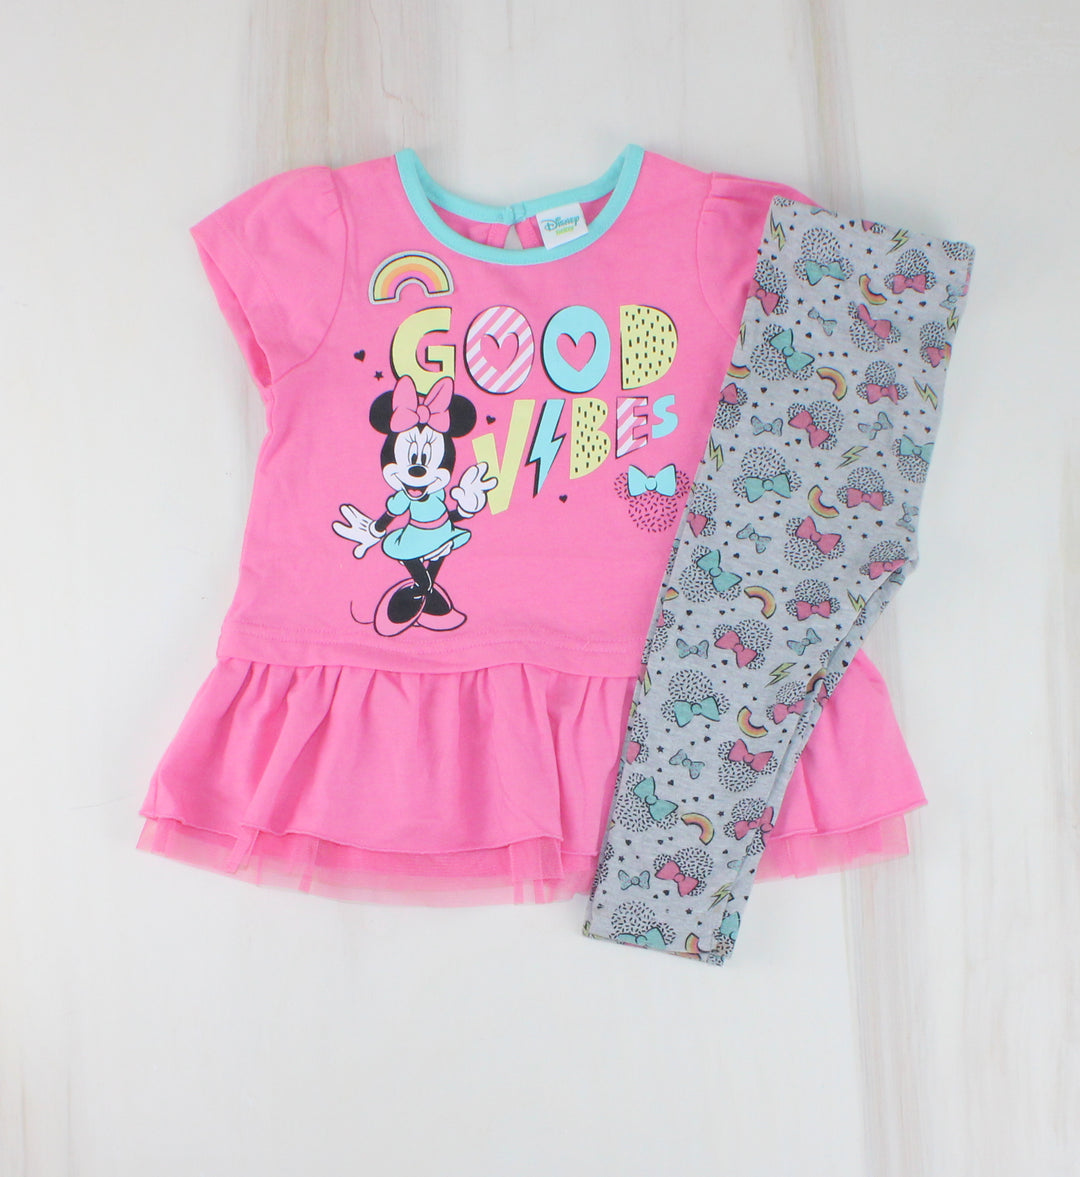 DISNEY MINNIE MOUSE GOOD VIBES OUTFIT 12M EUC